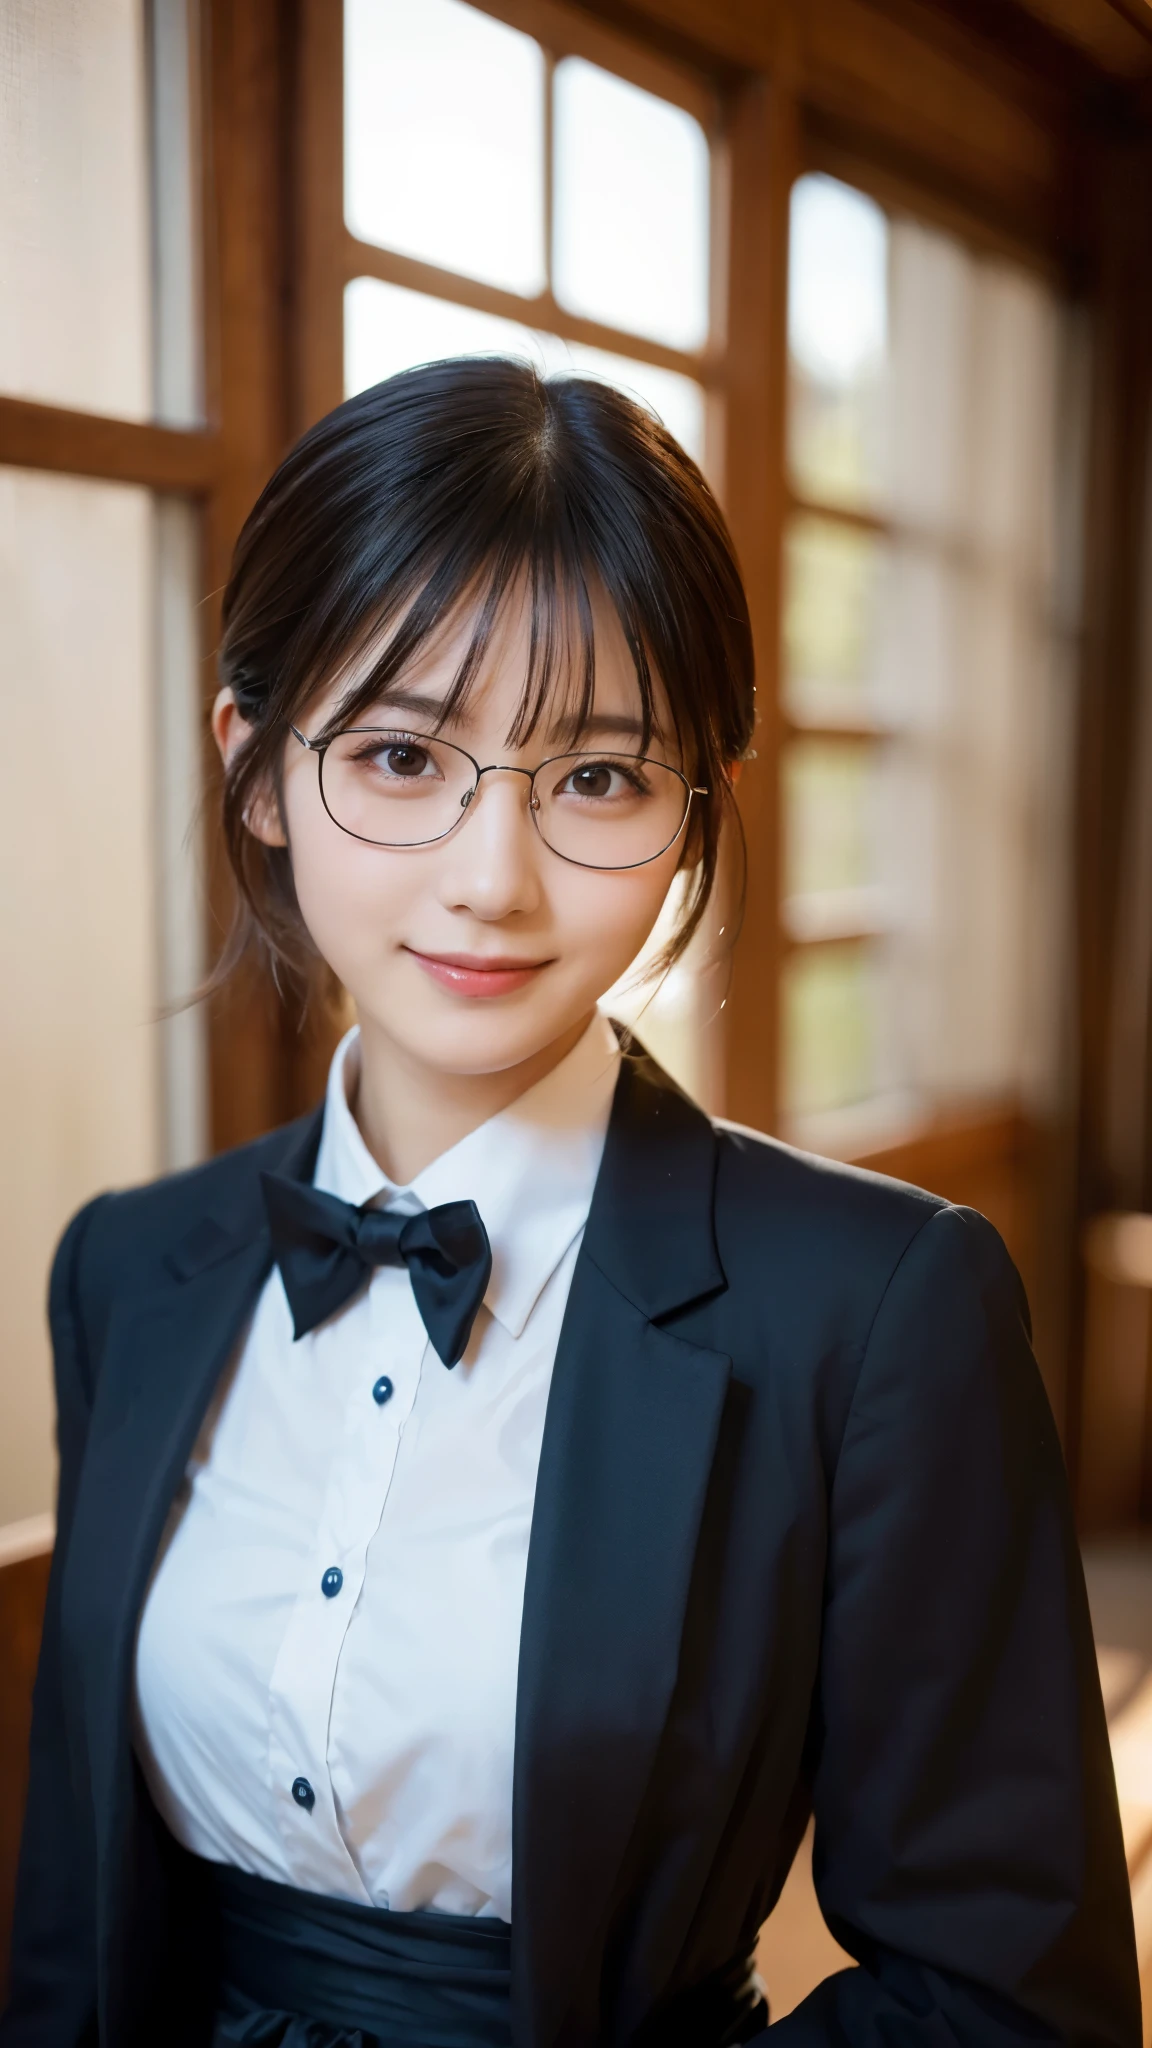 (highest quality,masterpiece:1.3,ultra high resolution),(Super detailed,caustics,8k),(photorealistic:1.4,RAW shooting),girl dressed as a butler,Japanese,boyish,smile,20-year-old,black hair short cut,glasses,looking at the camera,Inside a Western-style mansion,shot from the waist up,front,face focus,Face close-up,(Warm light),professional writing